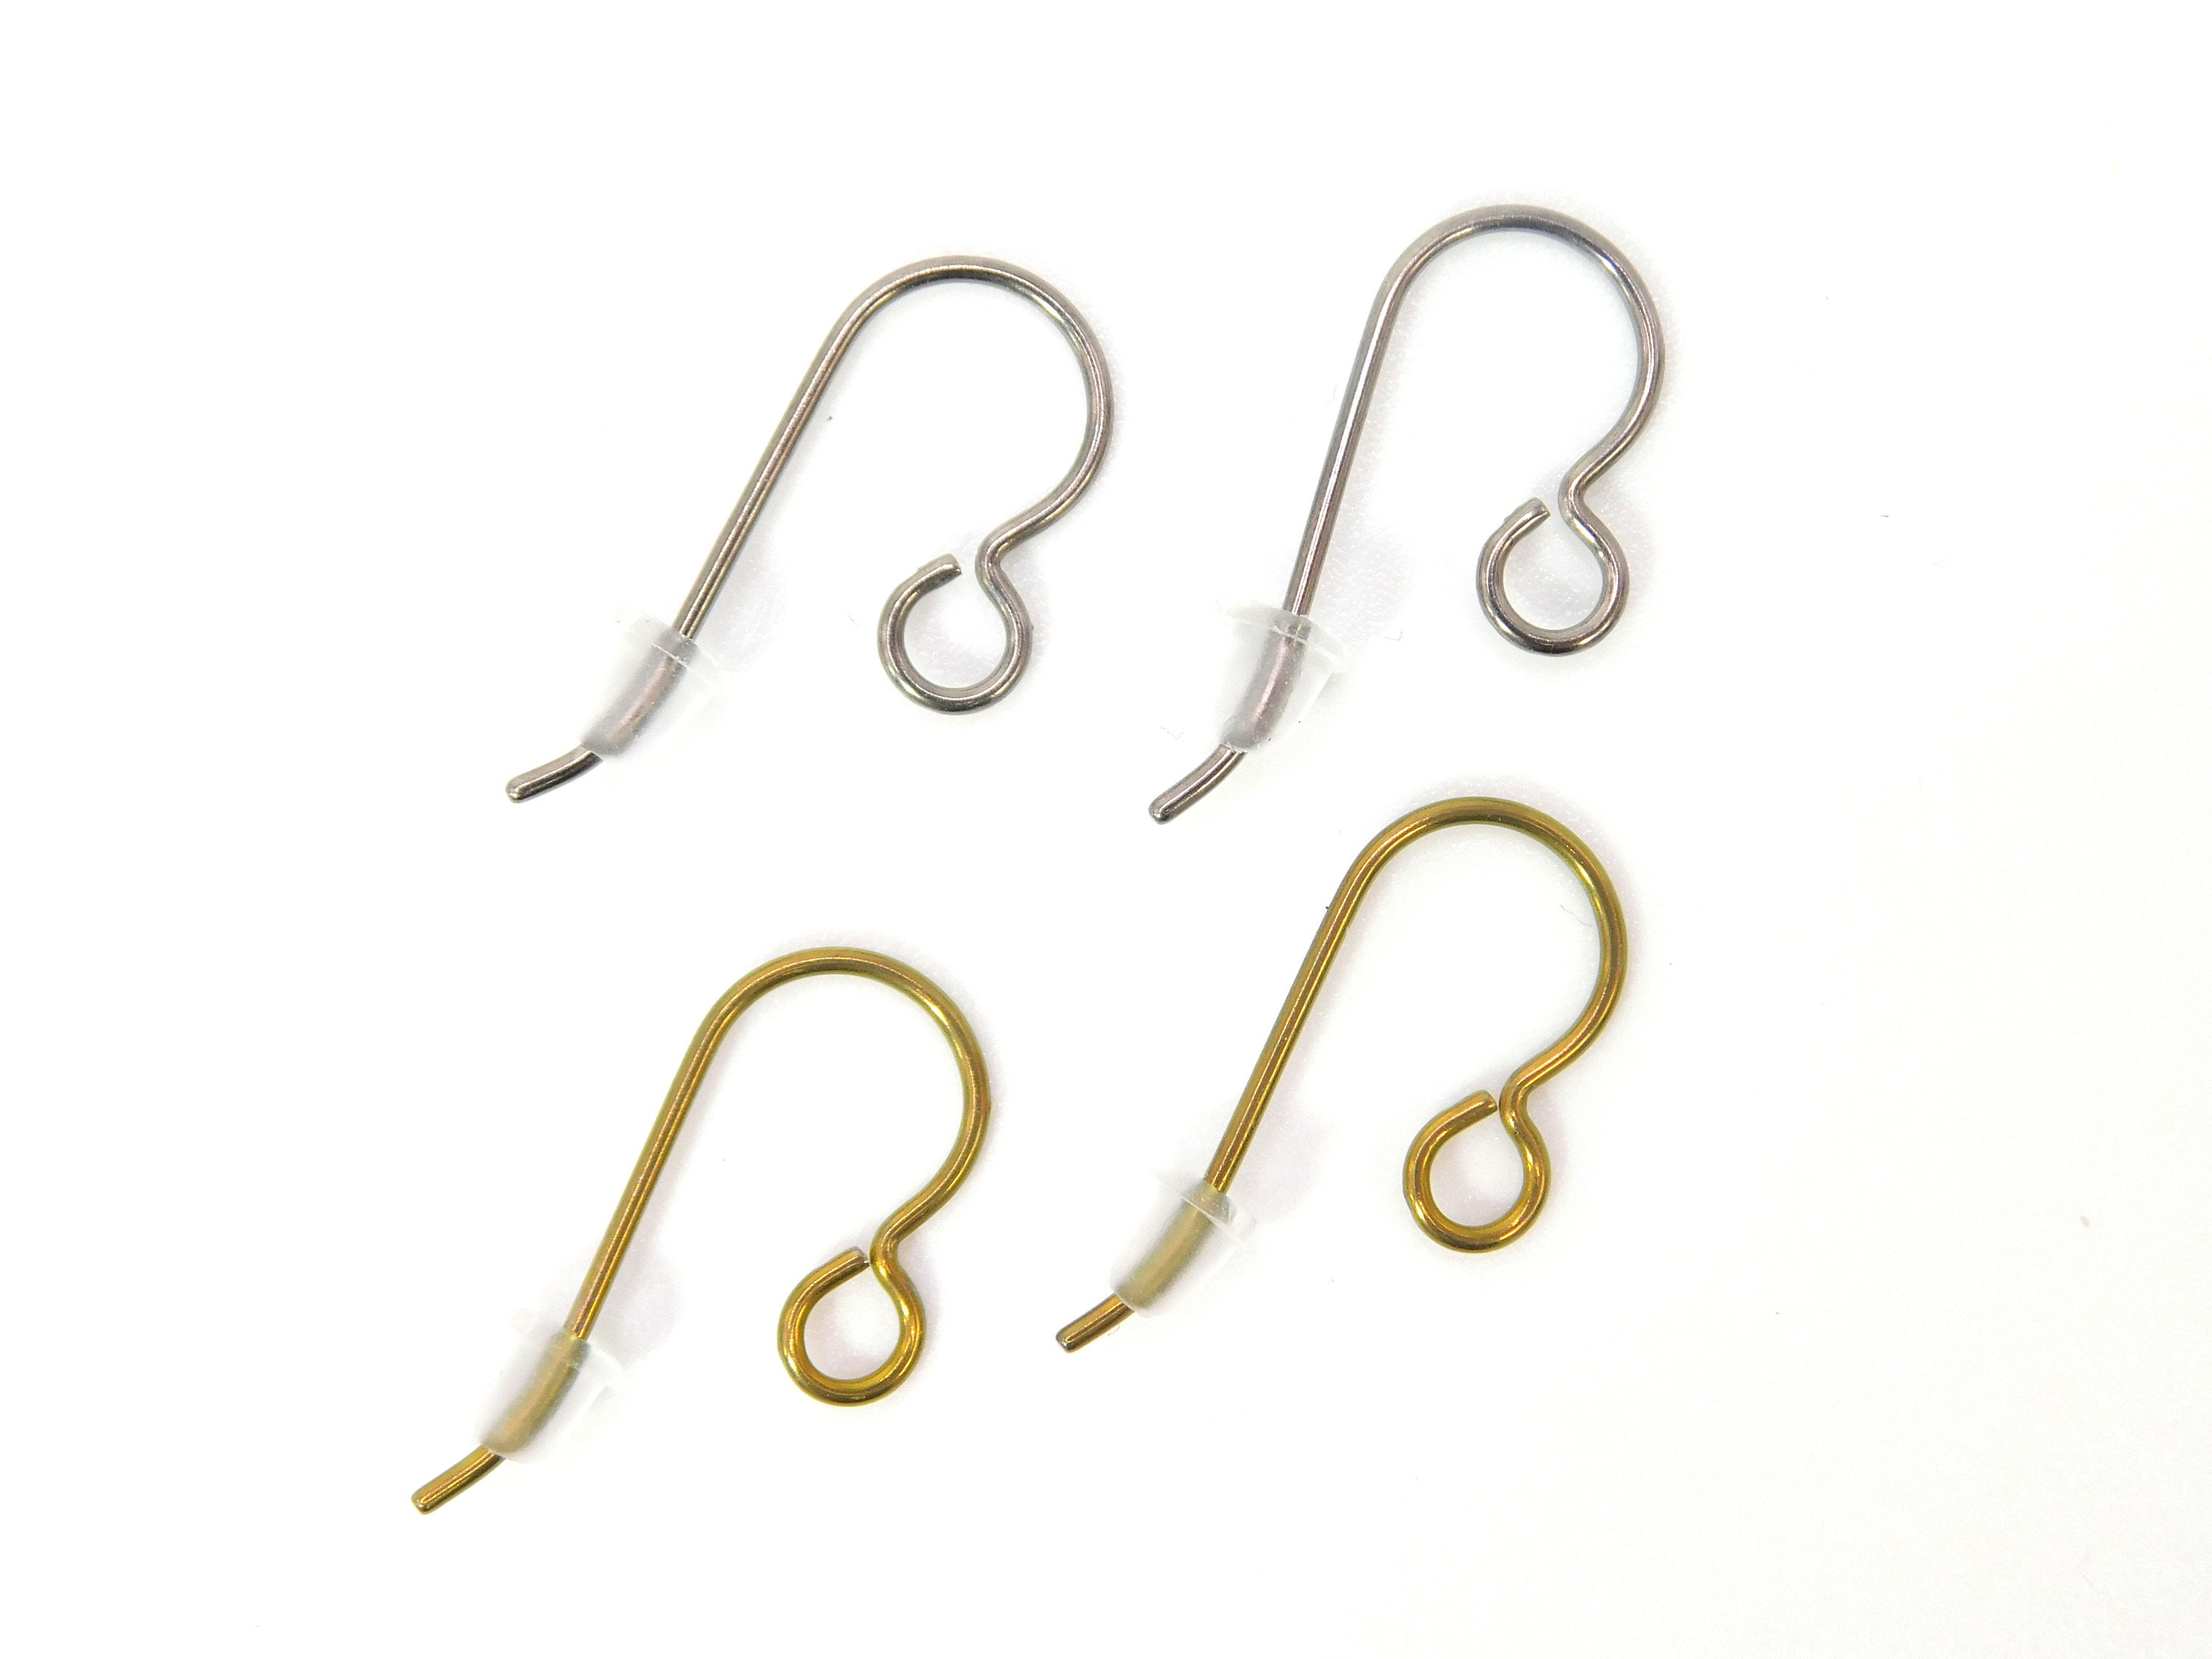 Titanium Hoops & Earwires for interchangeable dangles, charms and beads. -  Pure Titanium Earrings for Sensitive Ears